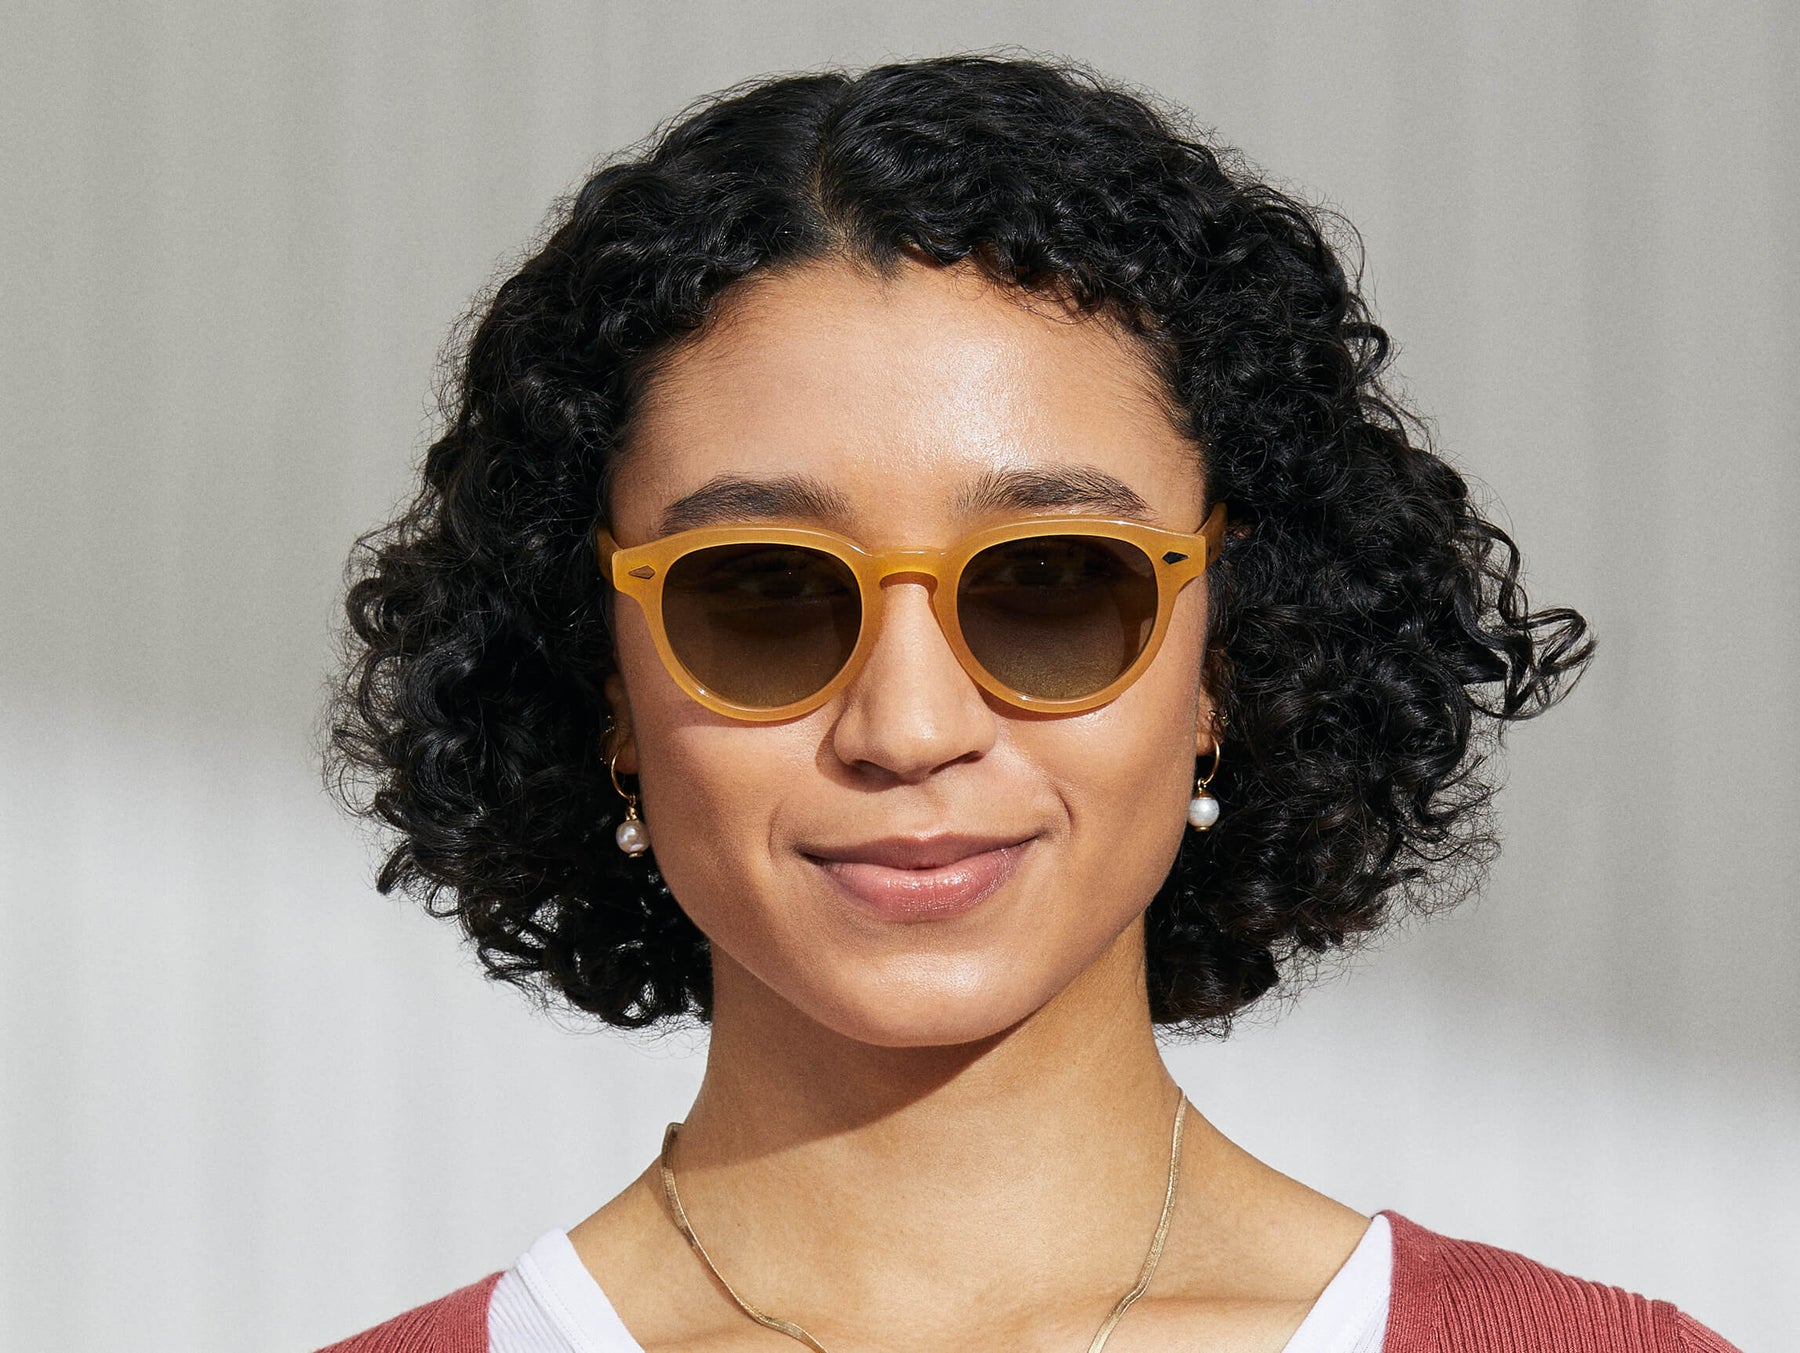 Model is wearing The MAYDELA SUN in Goldenrod in size 49 with Forest Wood Tinted Lenses